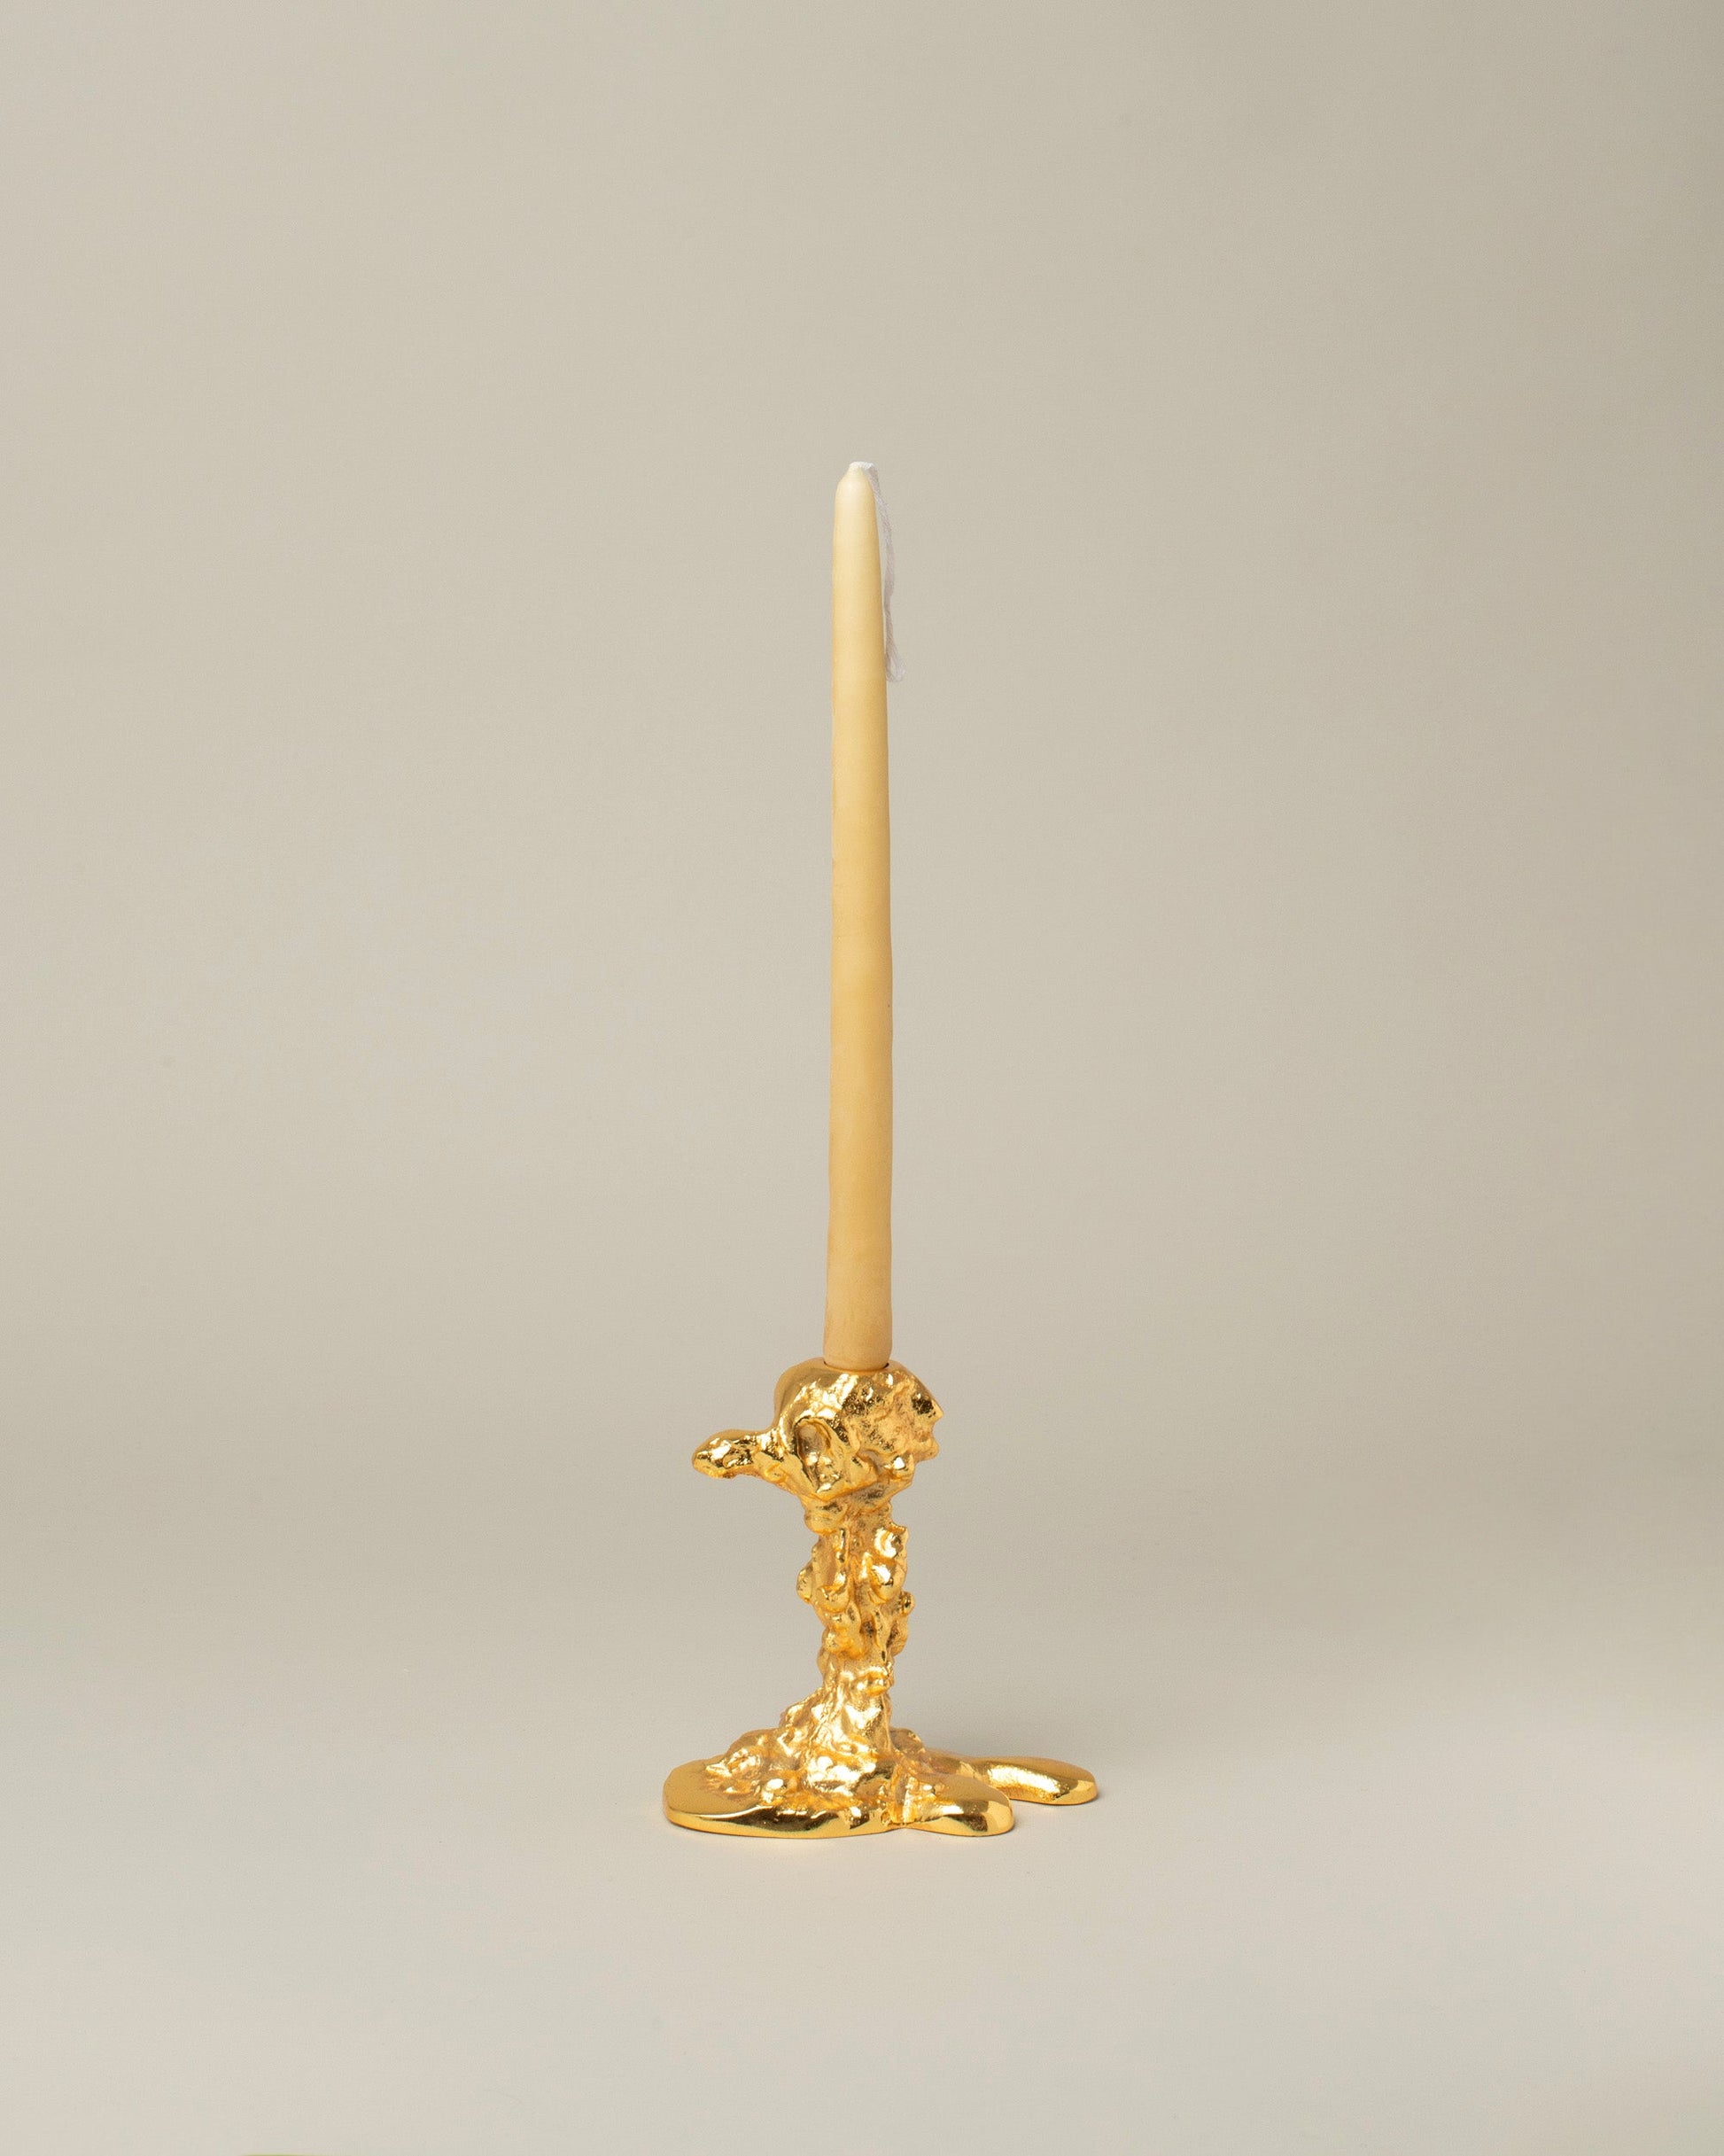 POLSPOTTEN Gold Small Drip Candle Holder on light color background.